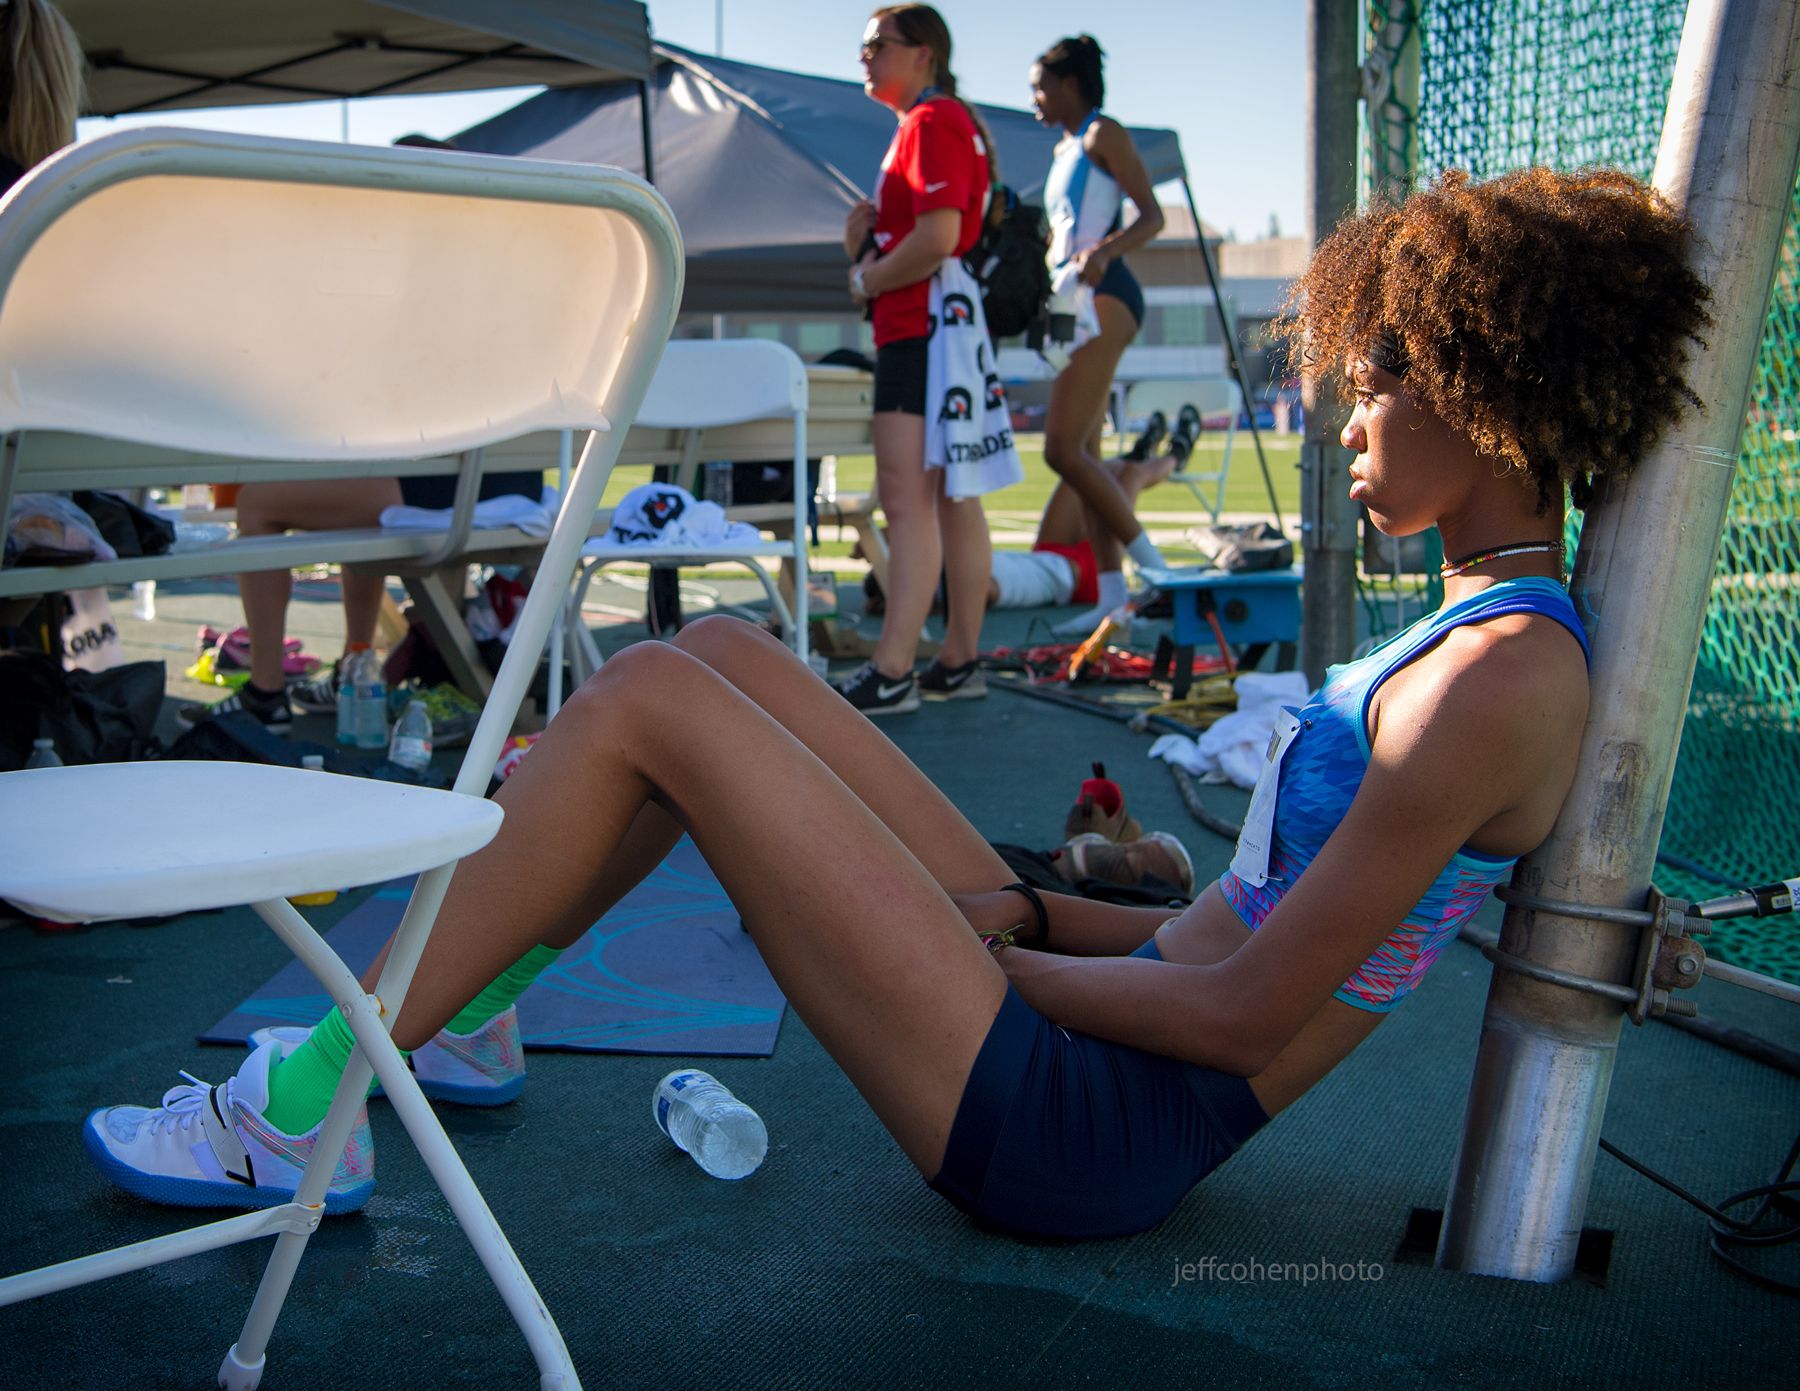 2017-usatf-outdoor-champs-day-2-cunningham-hjw--jeff-cohen-photo--4271-web.jpg